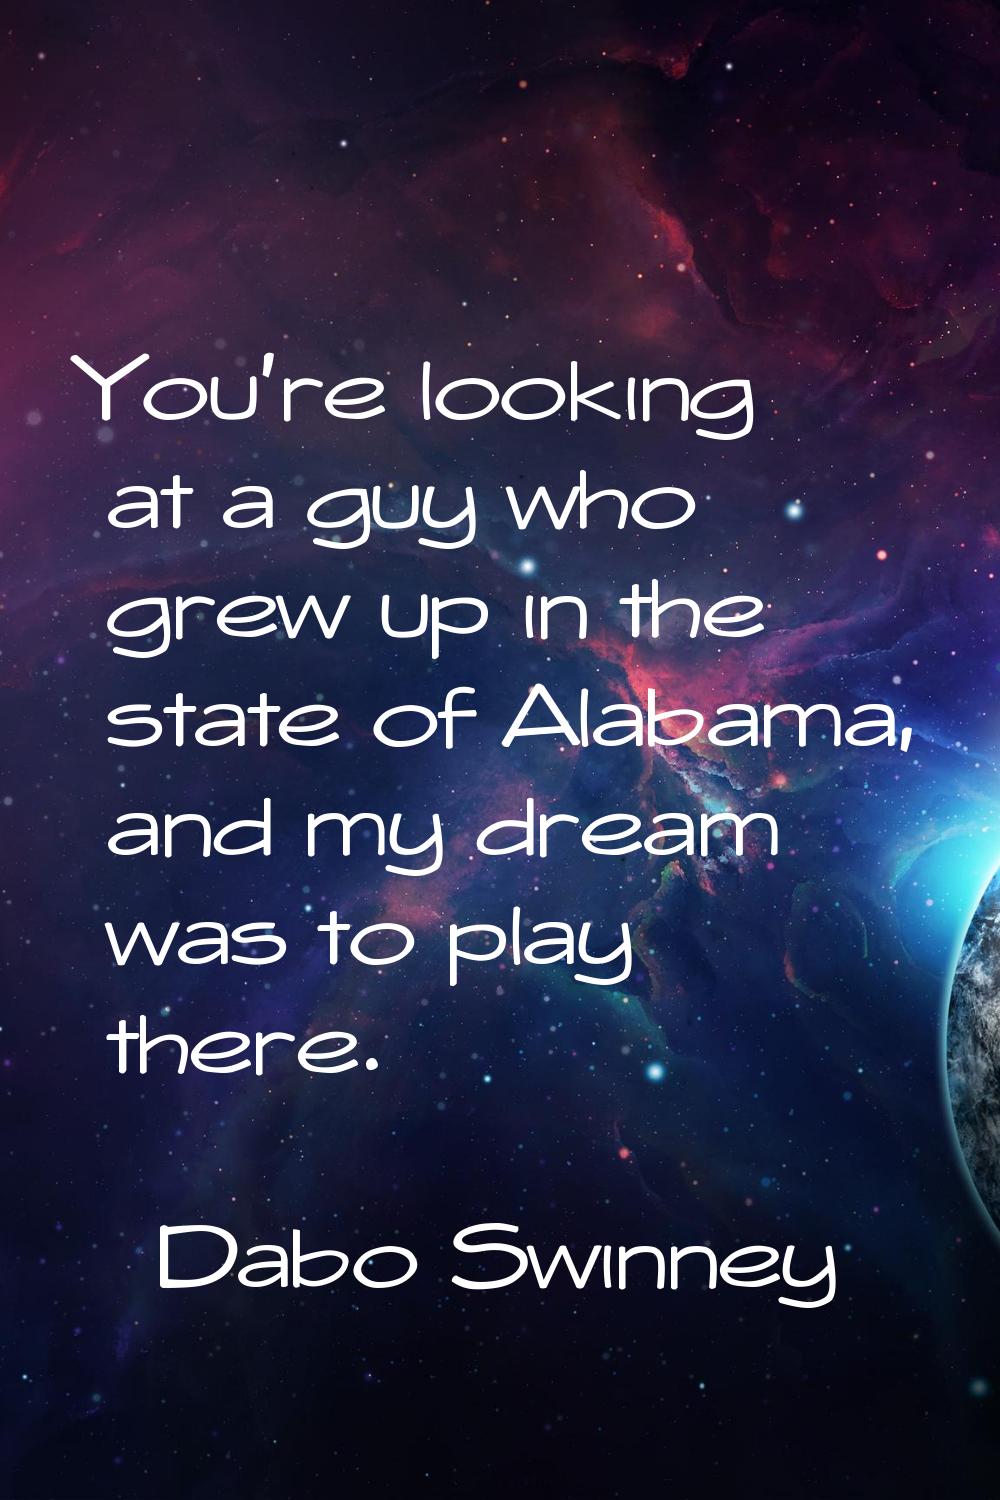 You're looking at a guy who grew up in the state of Alabama, and my dream was to play there.